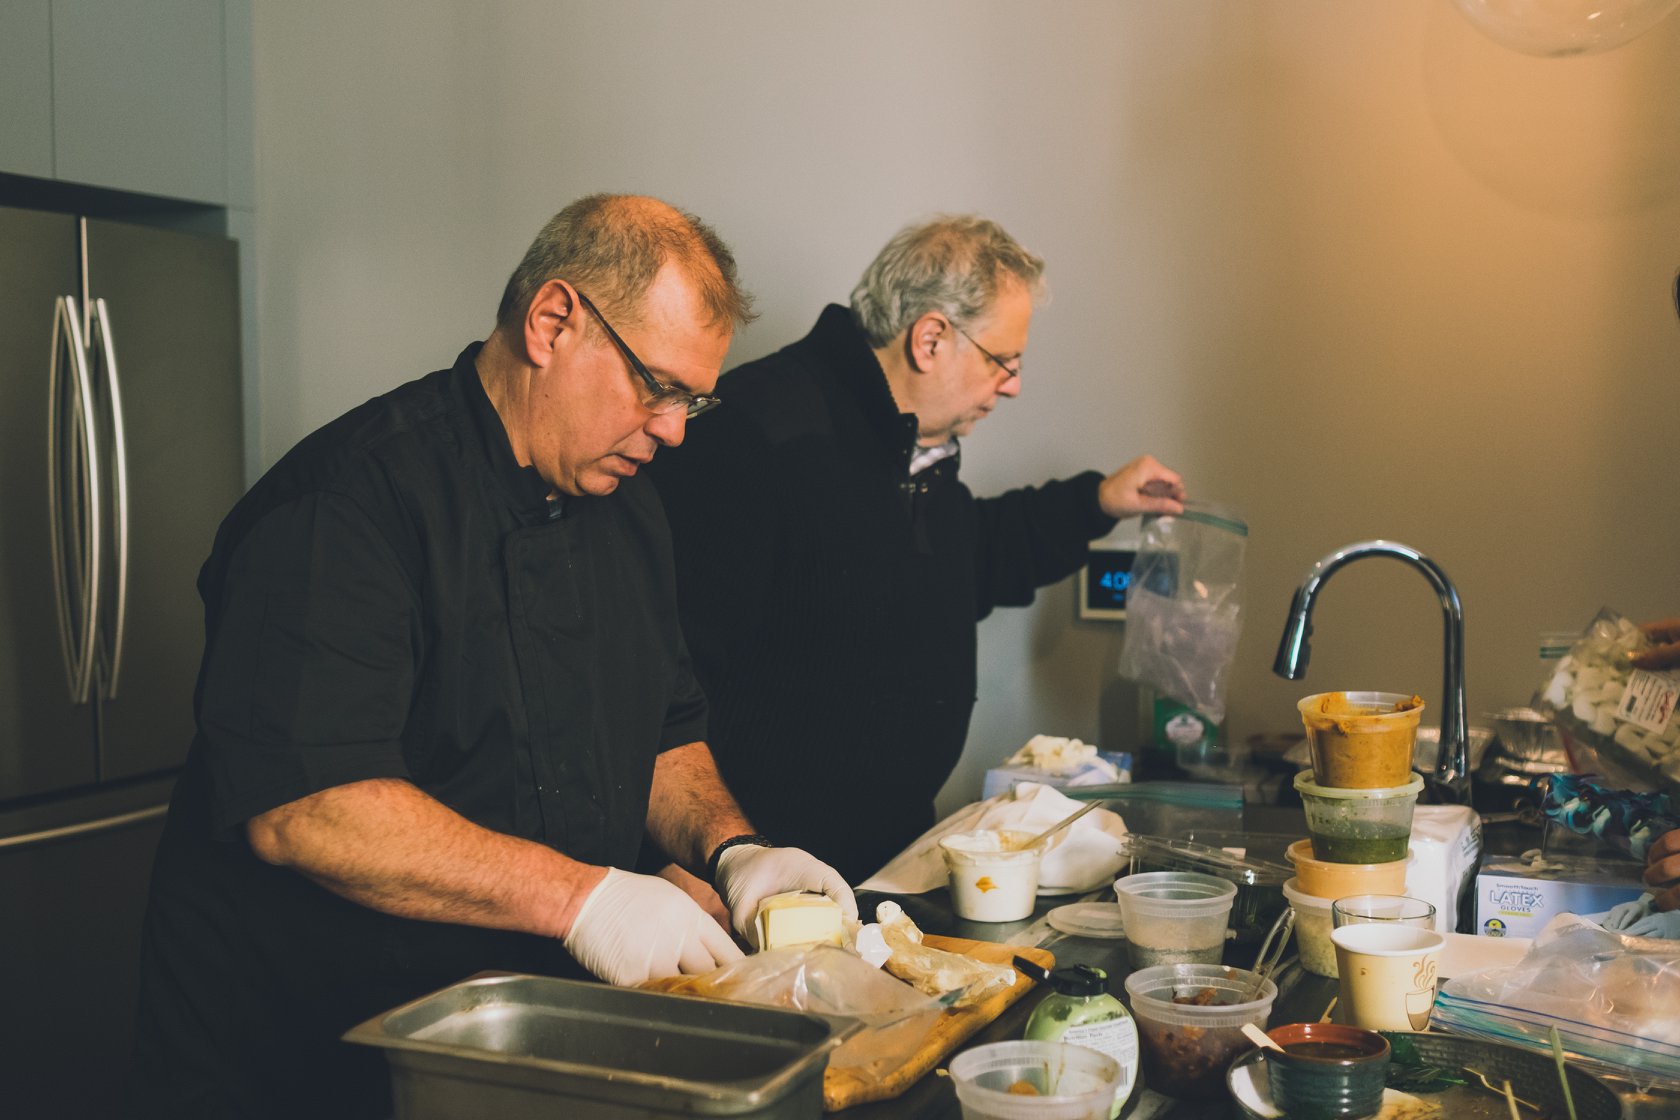 Two men are preparing food in a kitchen.